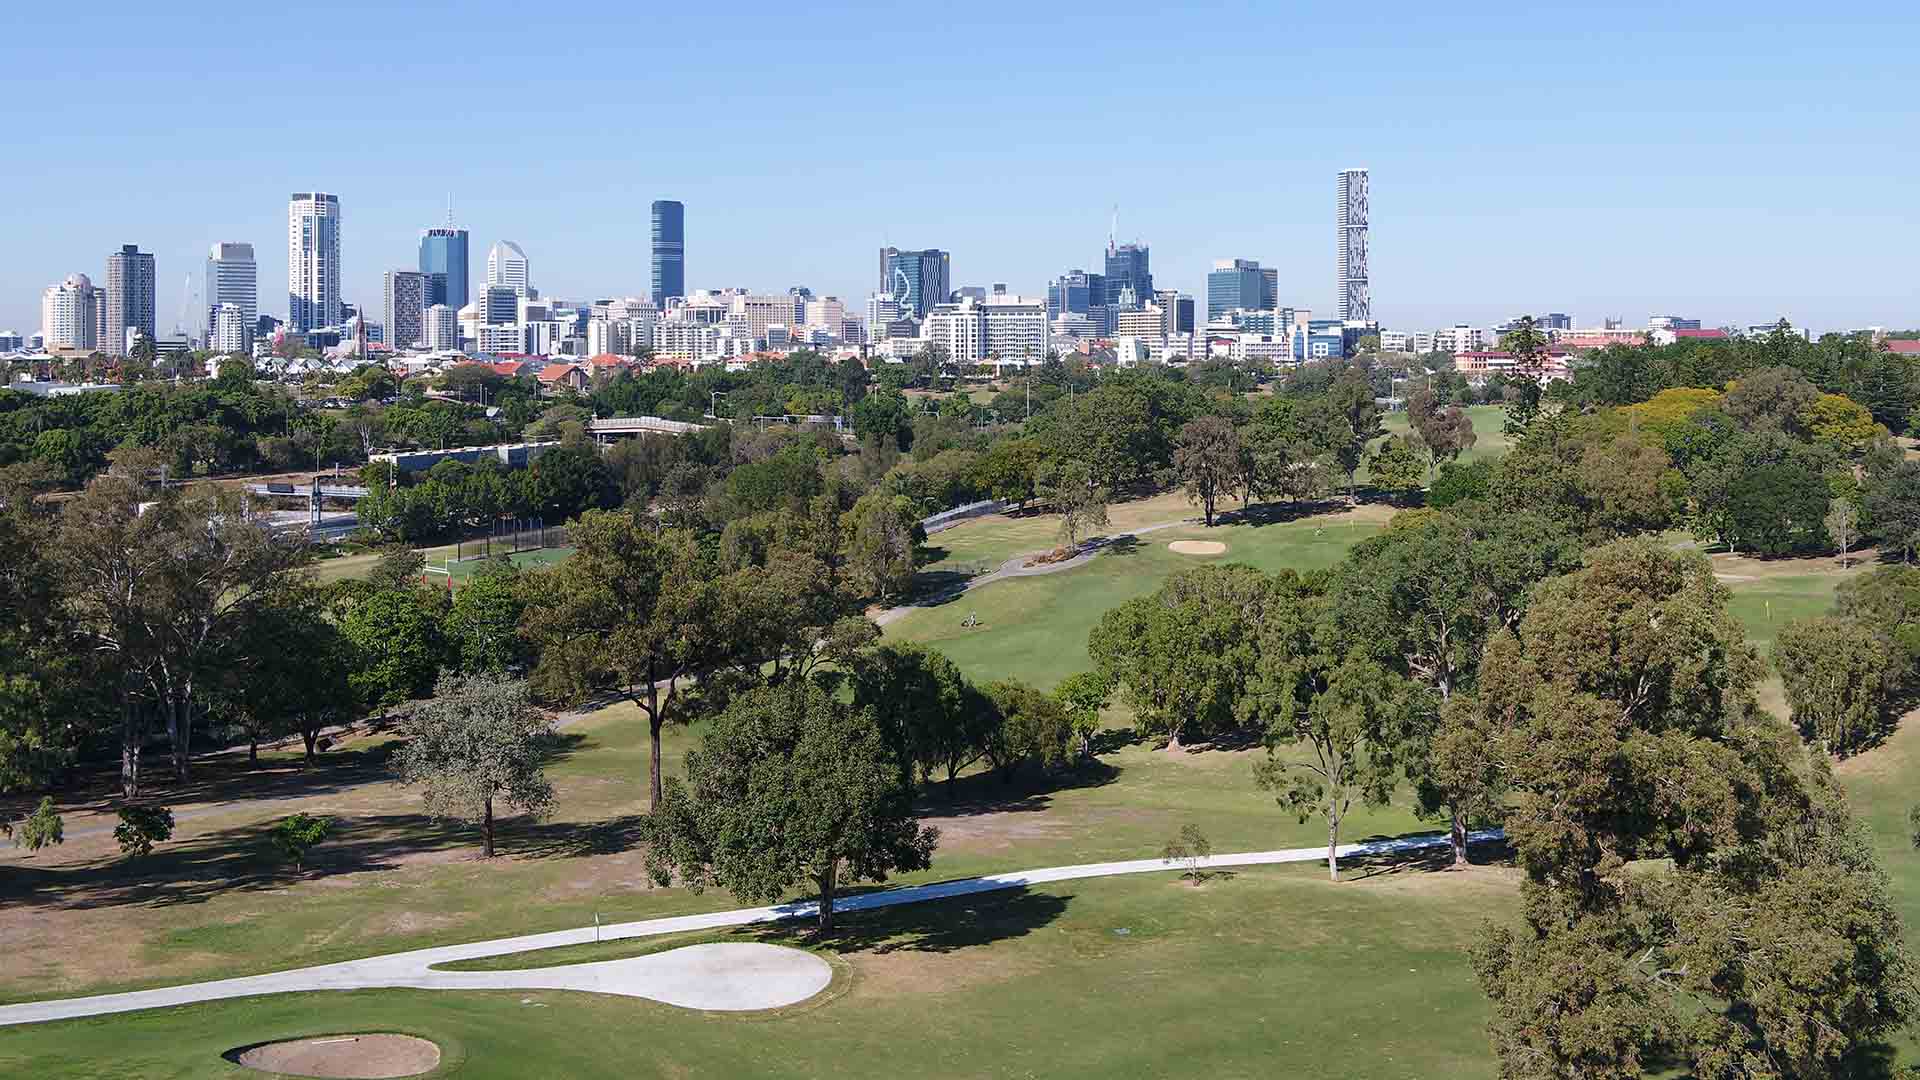 Brisbane City Council Is Asking for Your Thoughts on Brisbane's New 45-Hectare Public Park